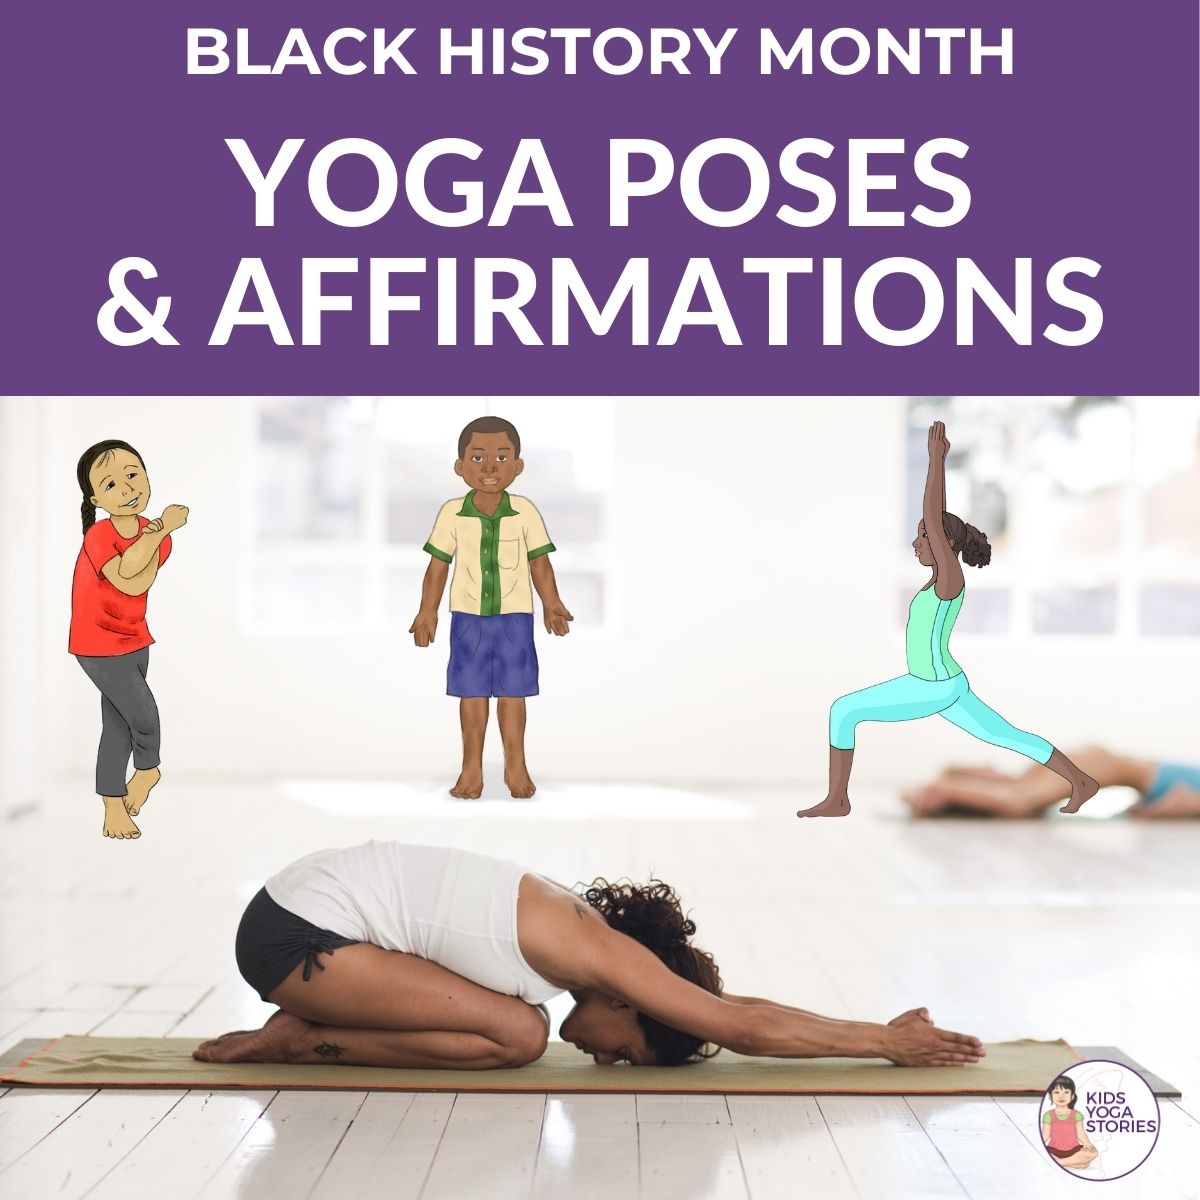 Black History Month for Kids: Yoga poses to honor Black historical figures | Kids Yoga Stories